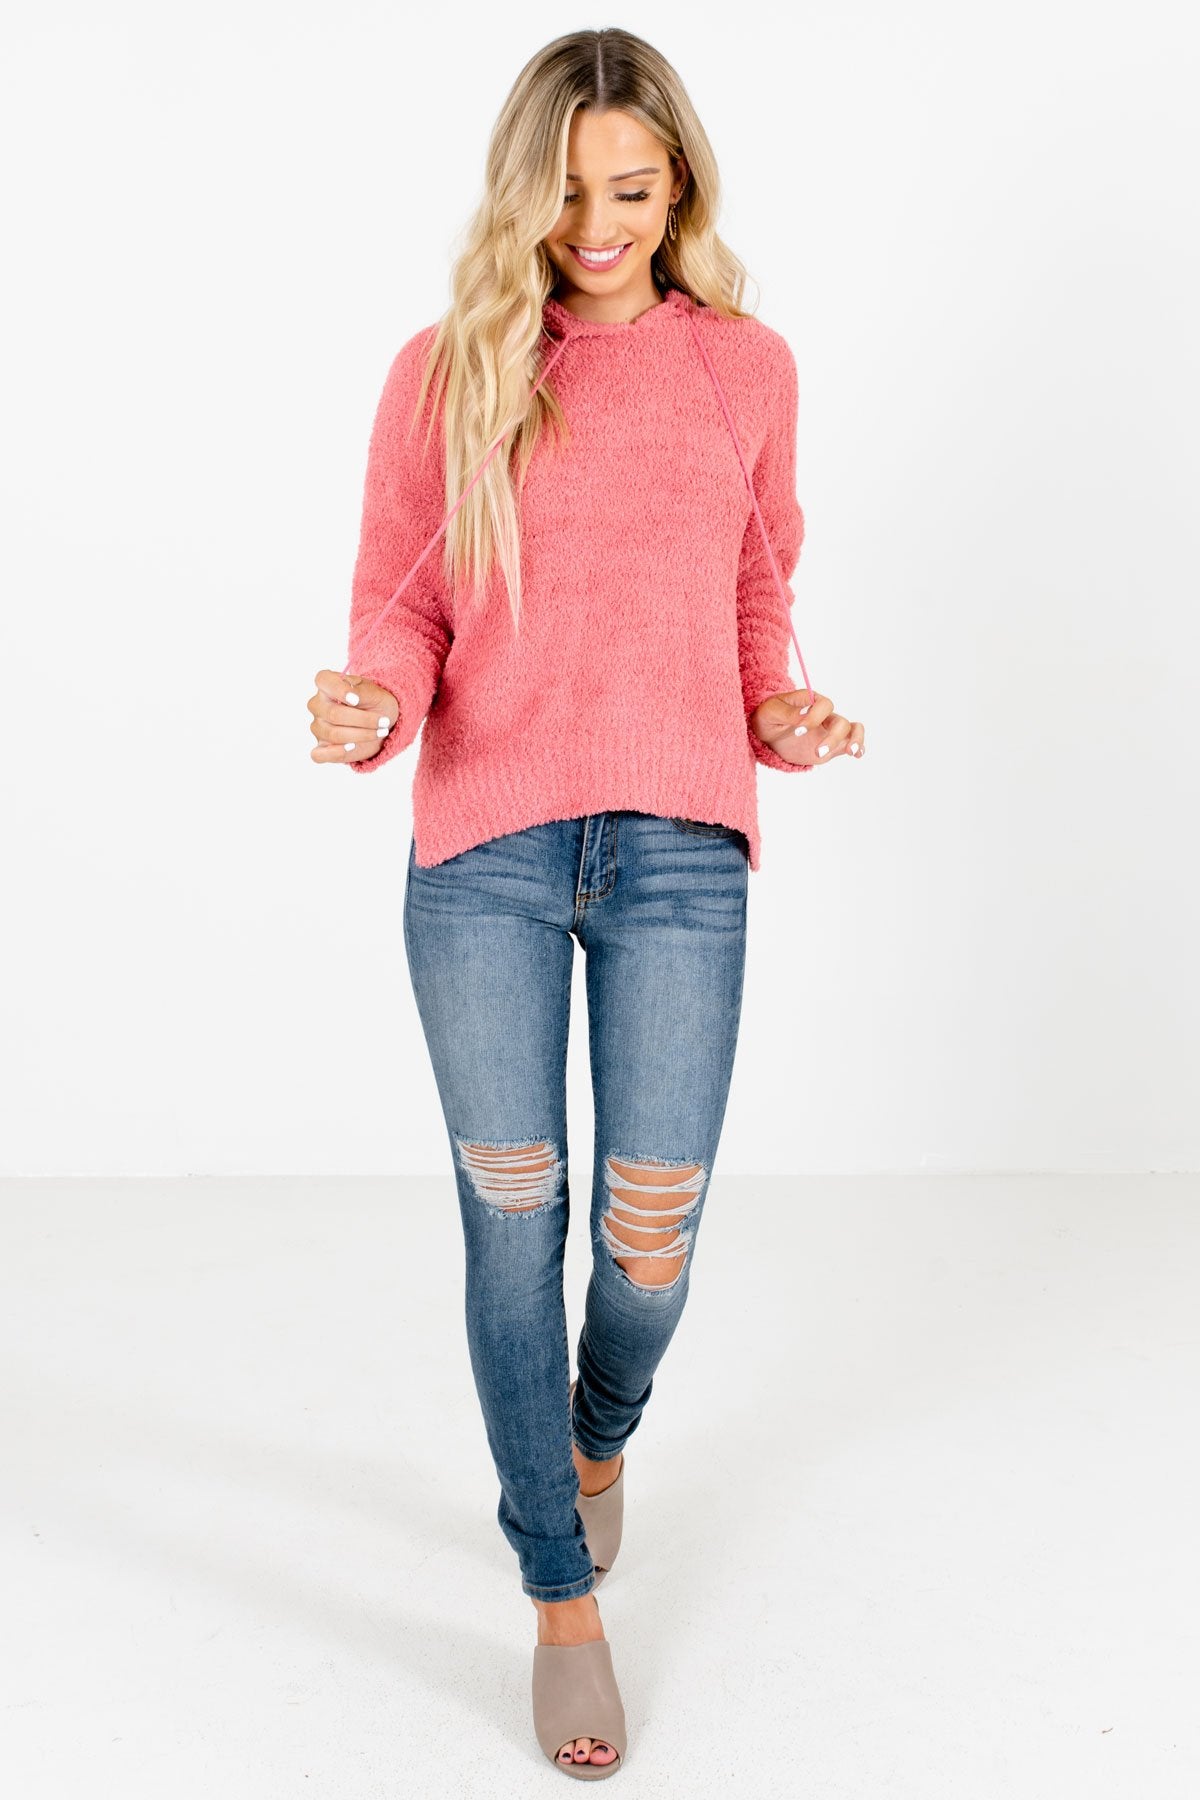 Coral Pink Cute and Comfortable Boutique Hoodies for Women